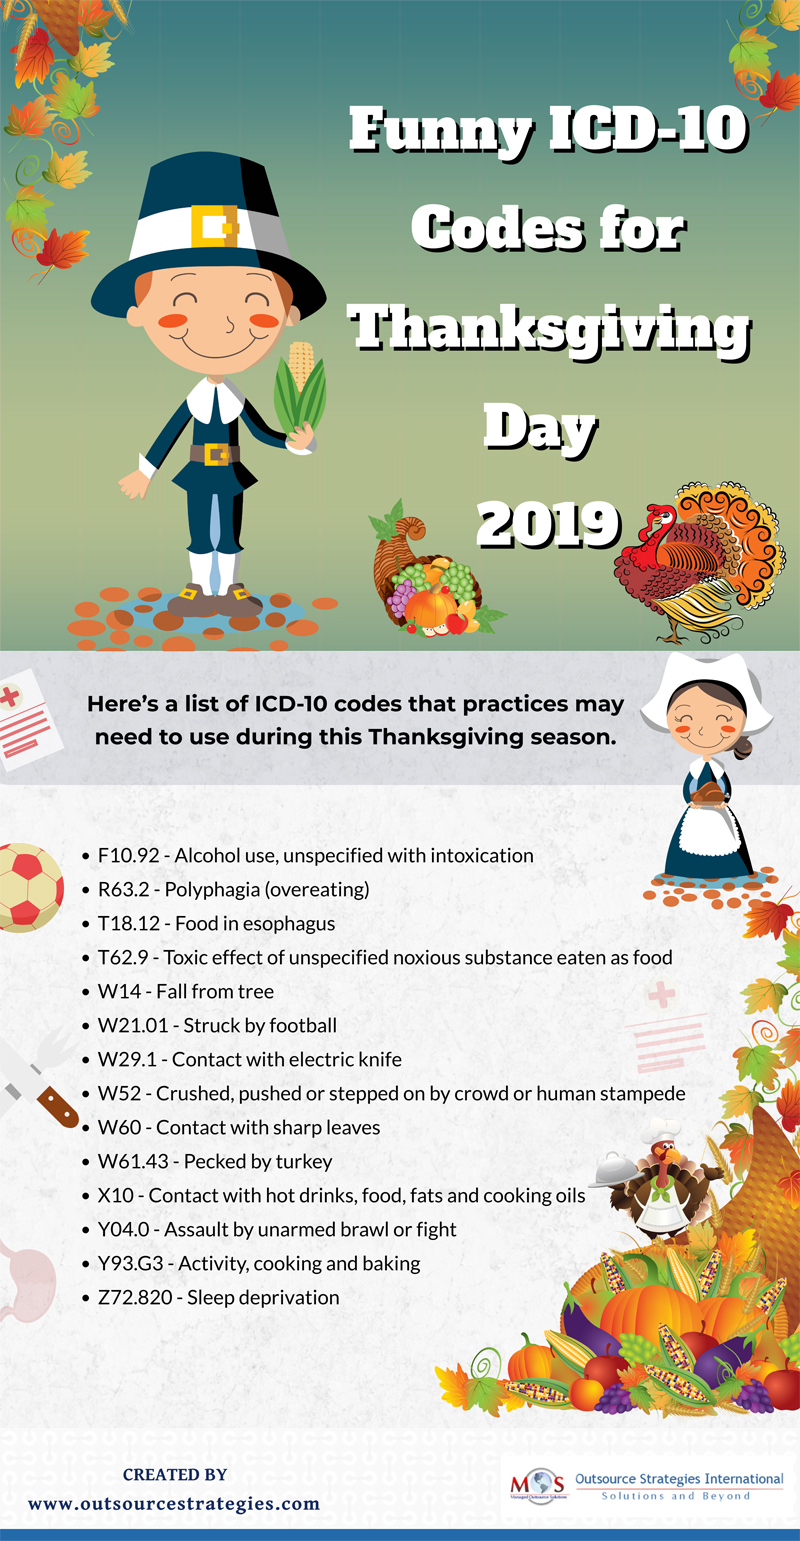 ICD-10 Codes for Thanksgiving Day